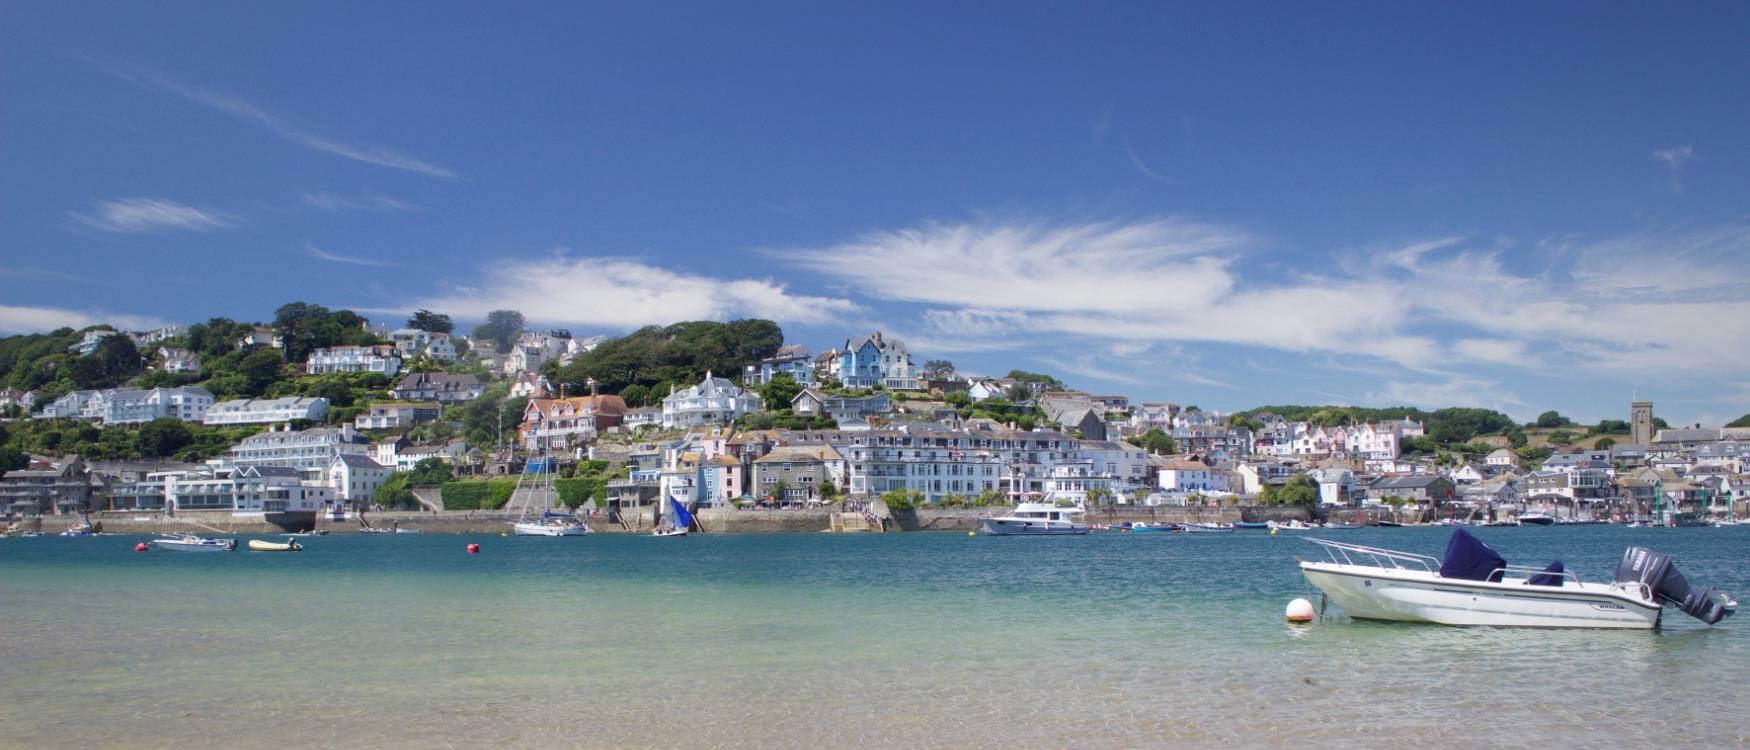 Where To Stay In Salcombe